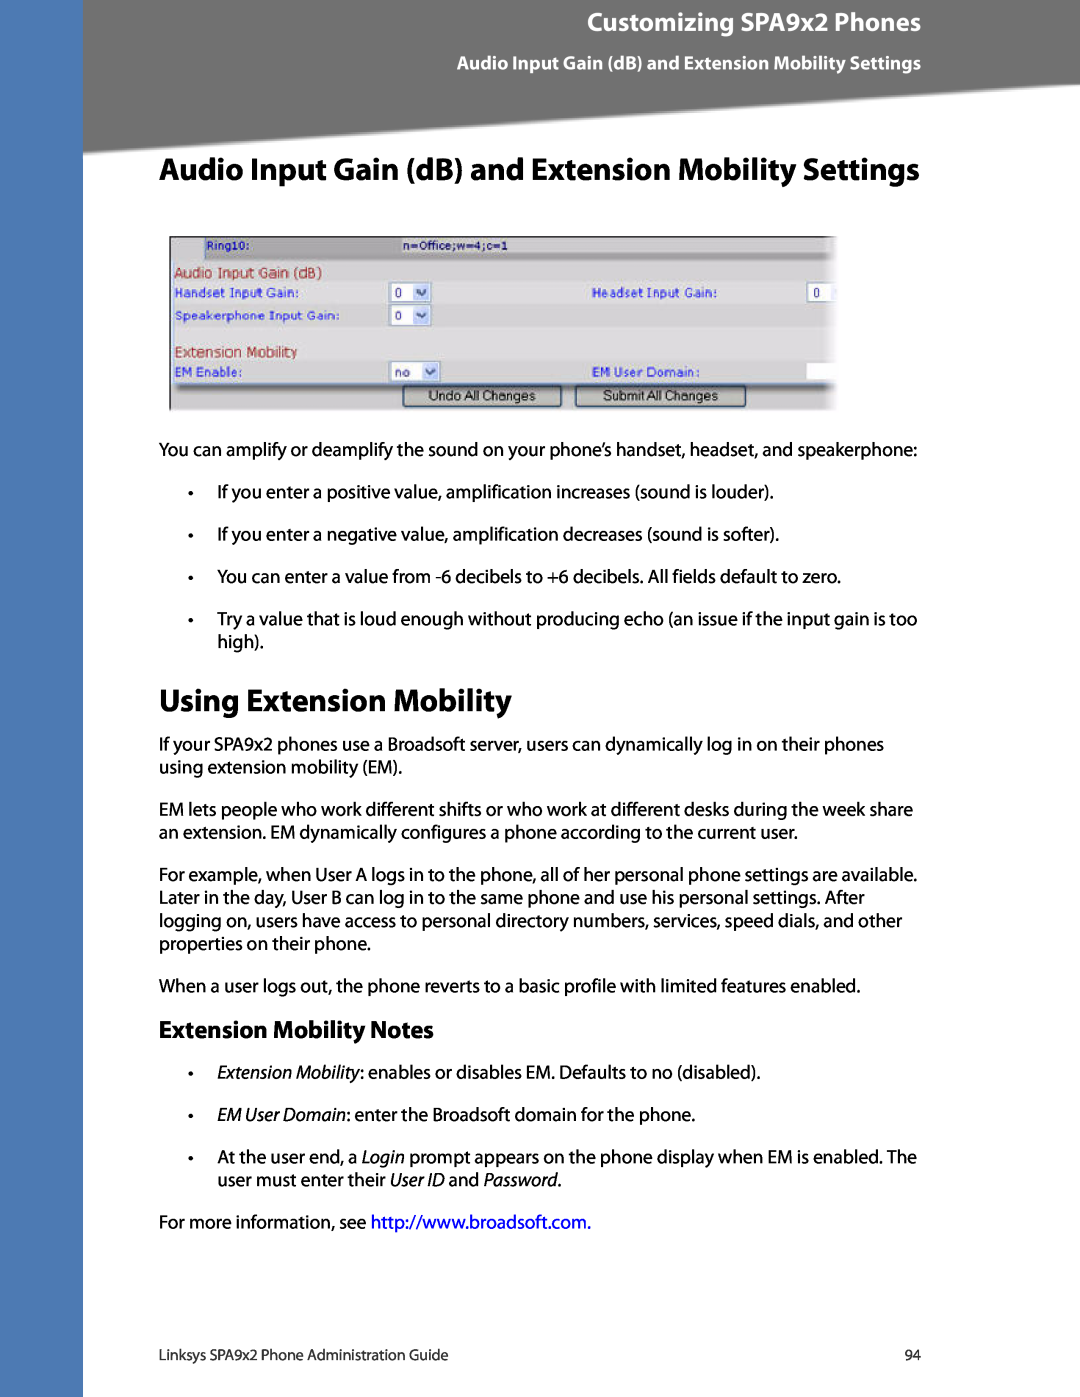 Linksys SPA942 Audio Input Gain dB and Extension Mobility Settings, Using Extension Mobility, Extension Mobility Notes 